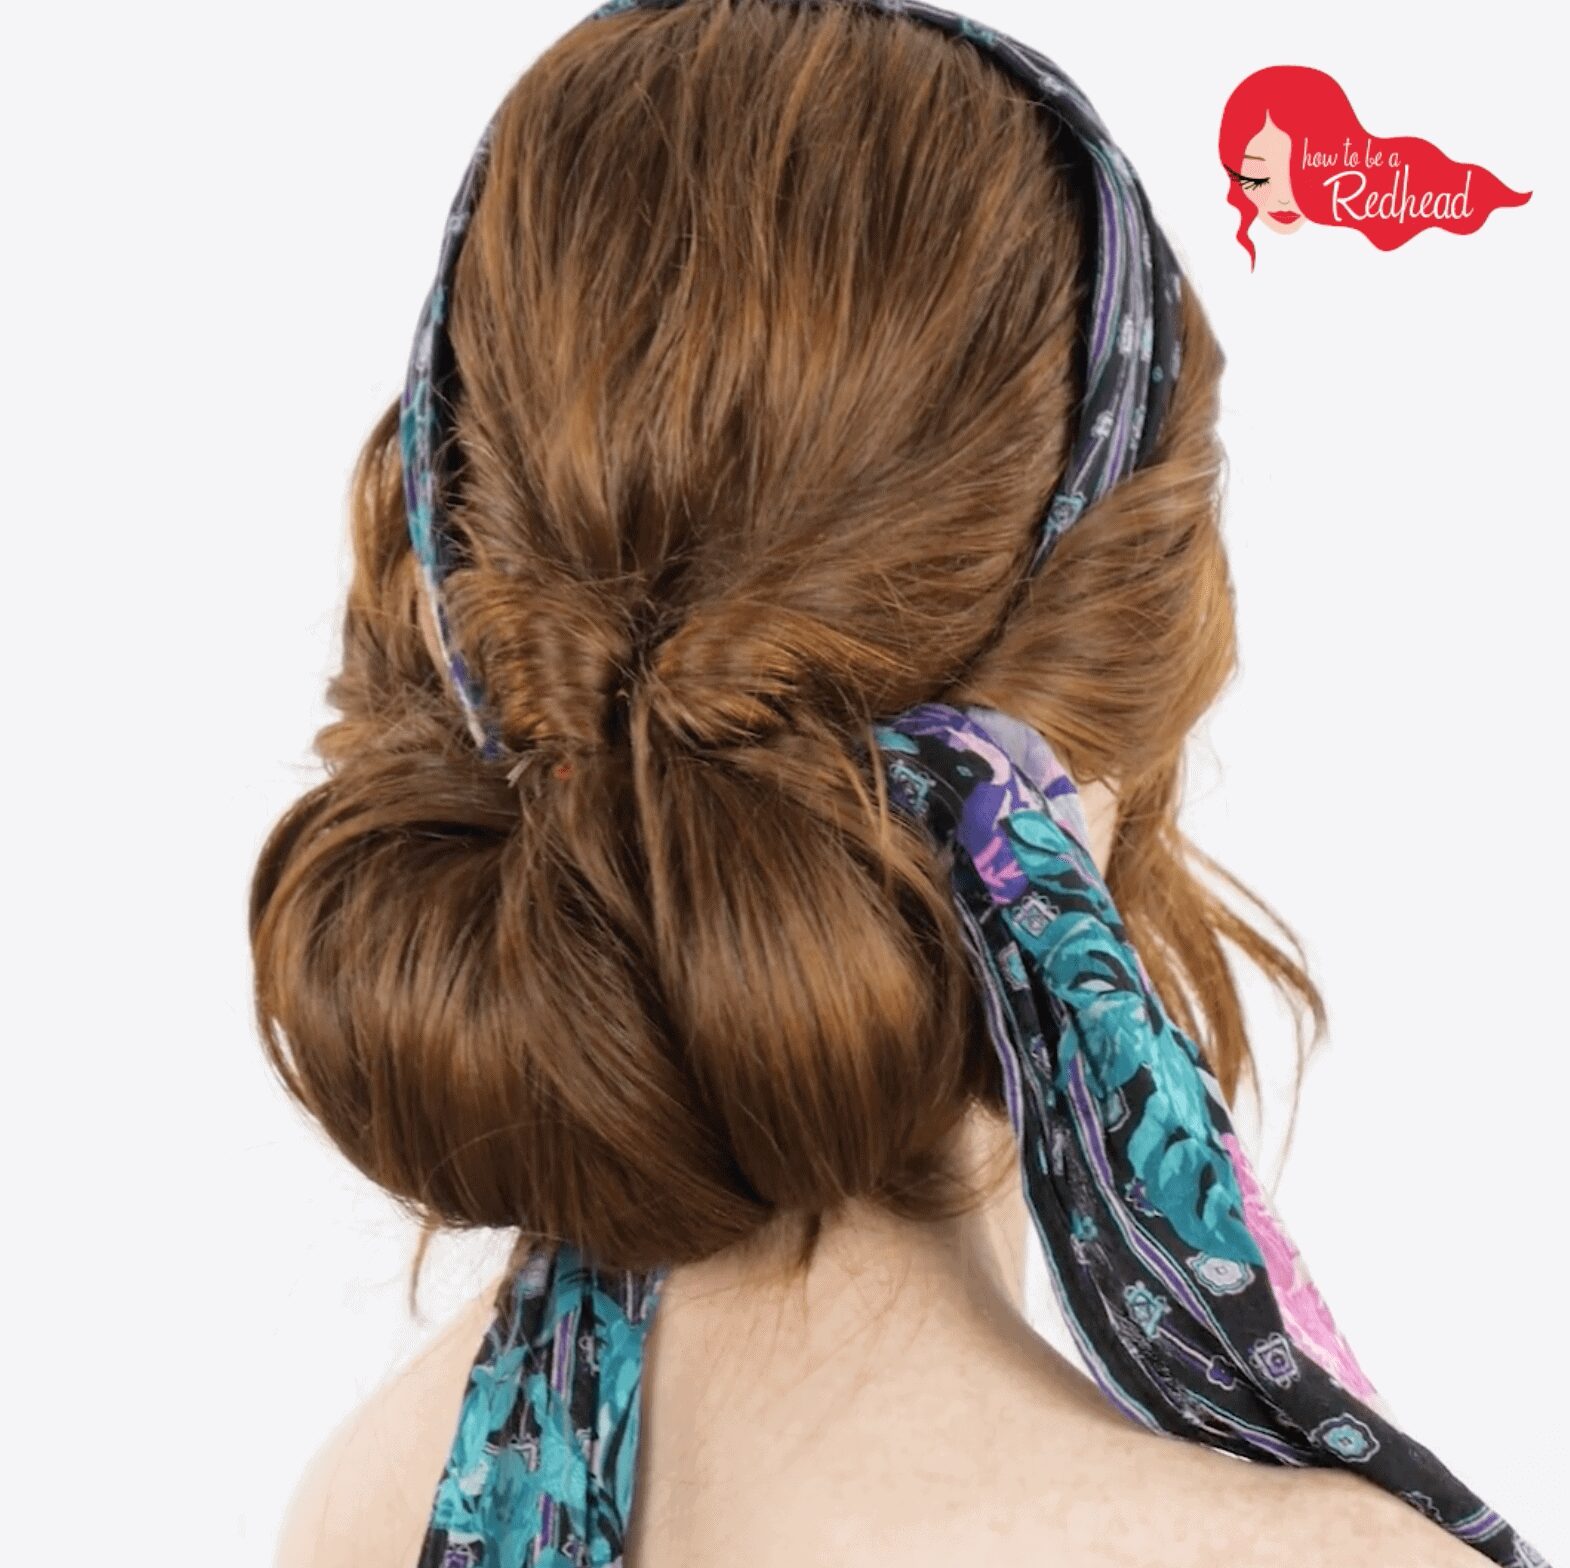 9 Amazon Hair Accessories to Highlight Your Red Hair